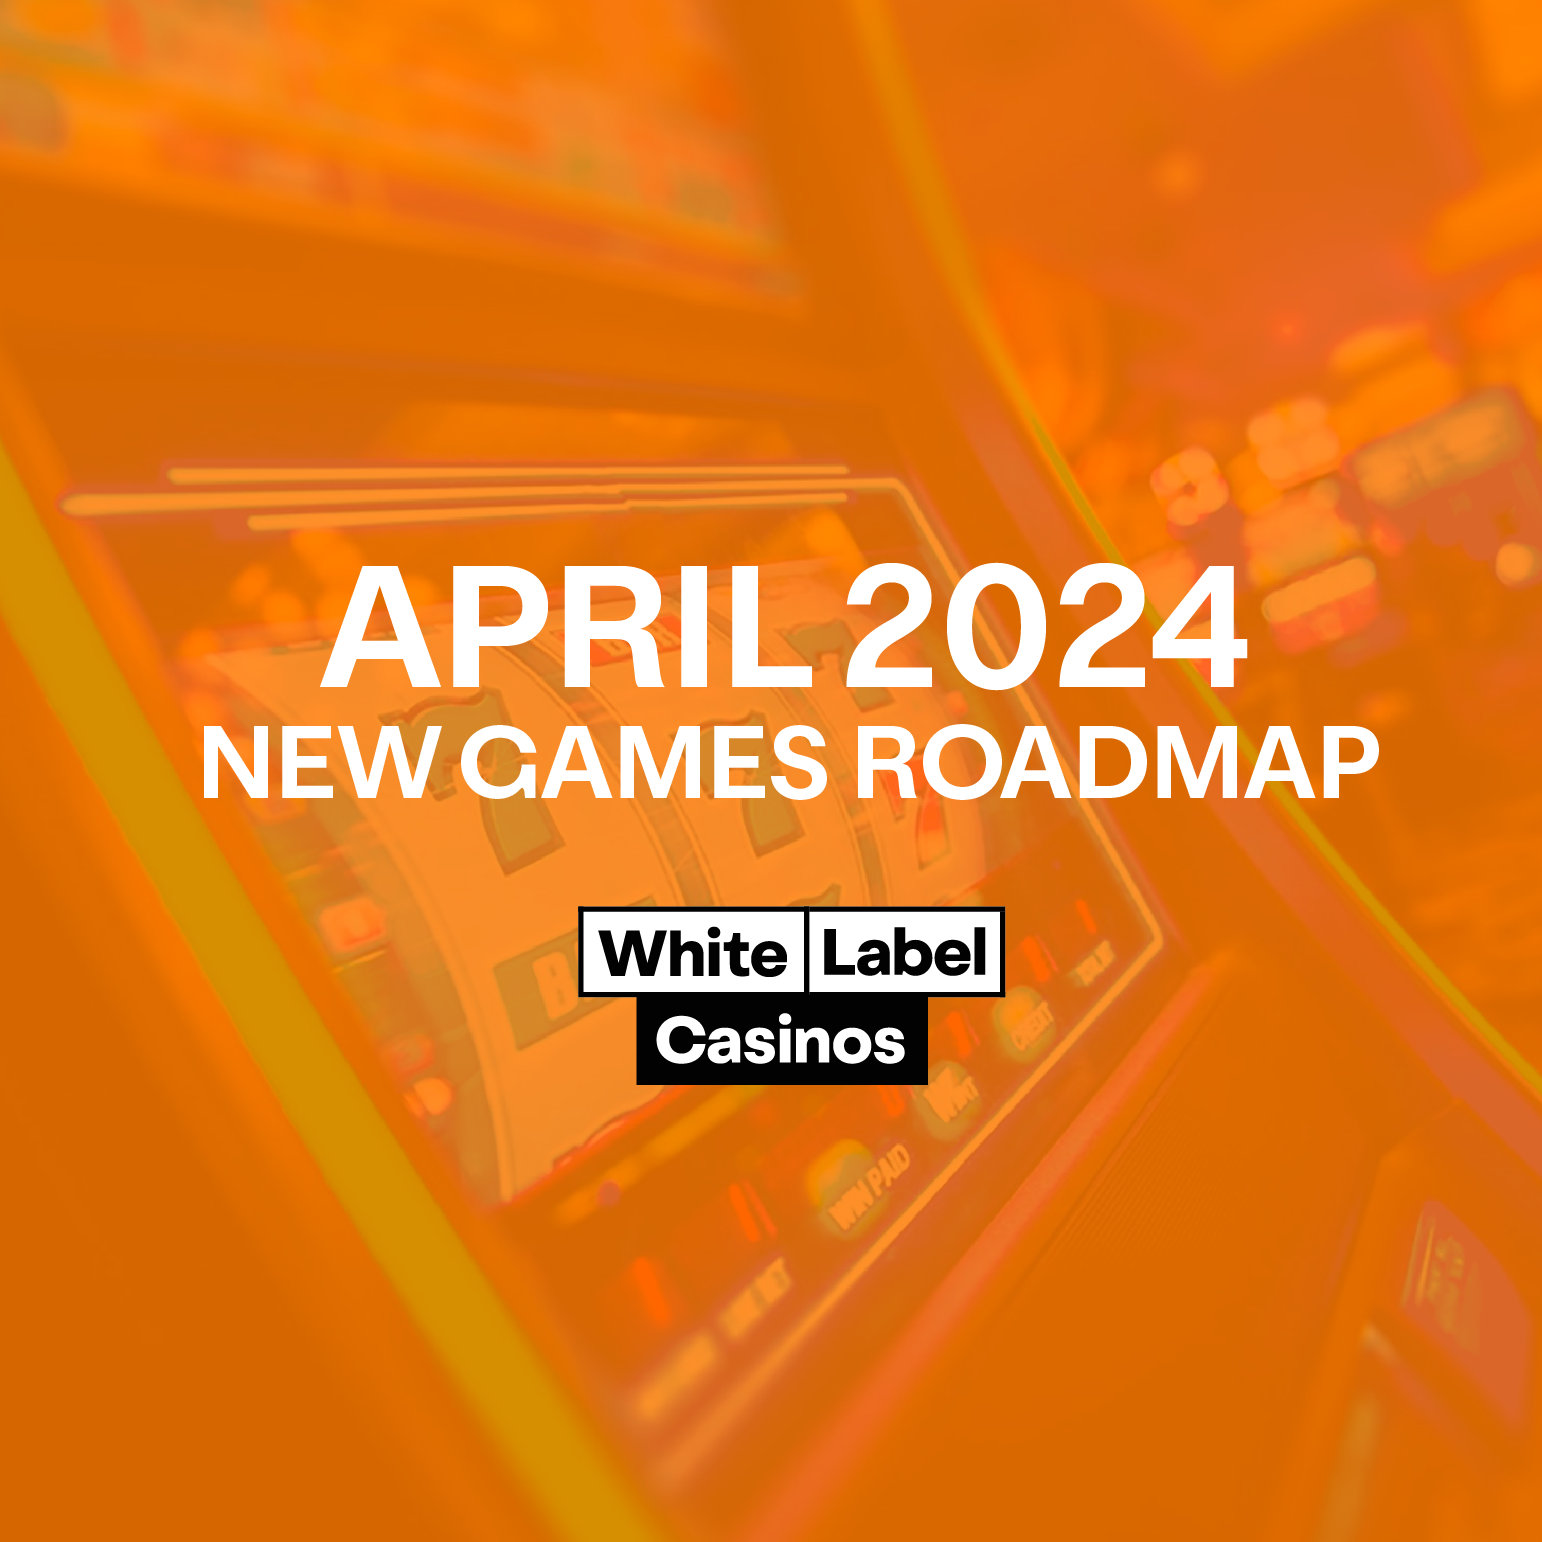 April 2024 New Games Roadmap for White Label Casinos